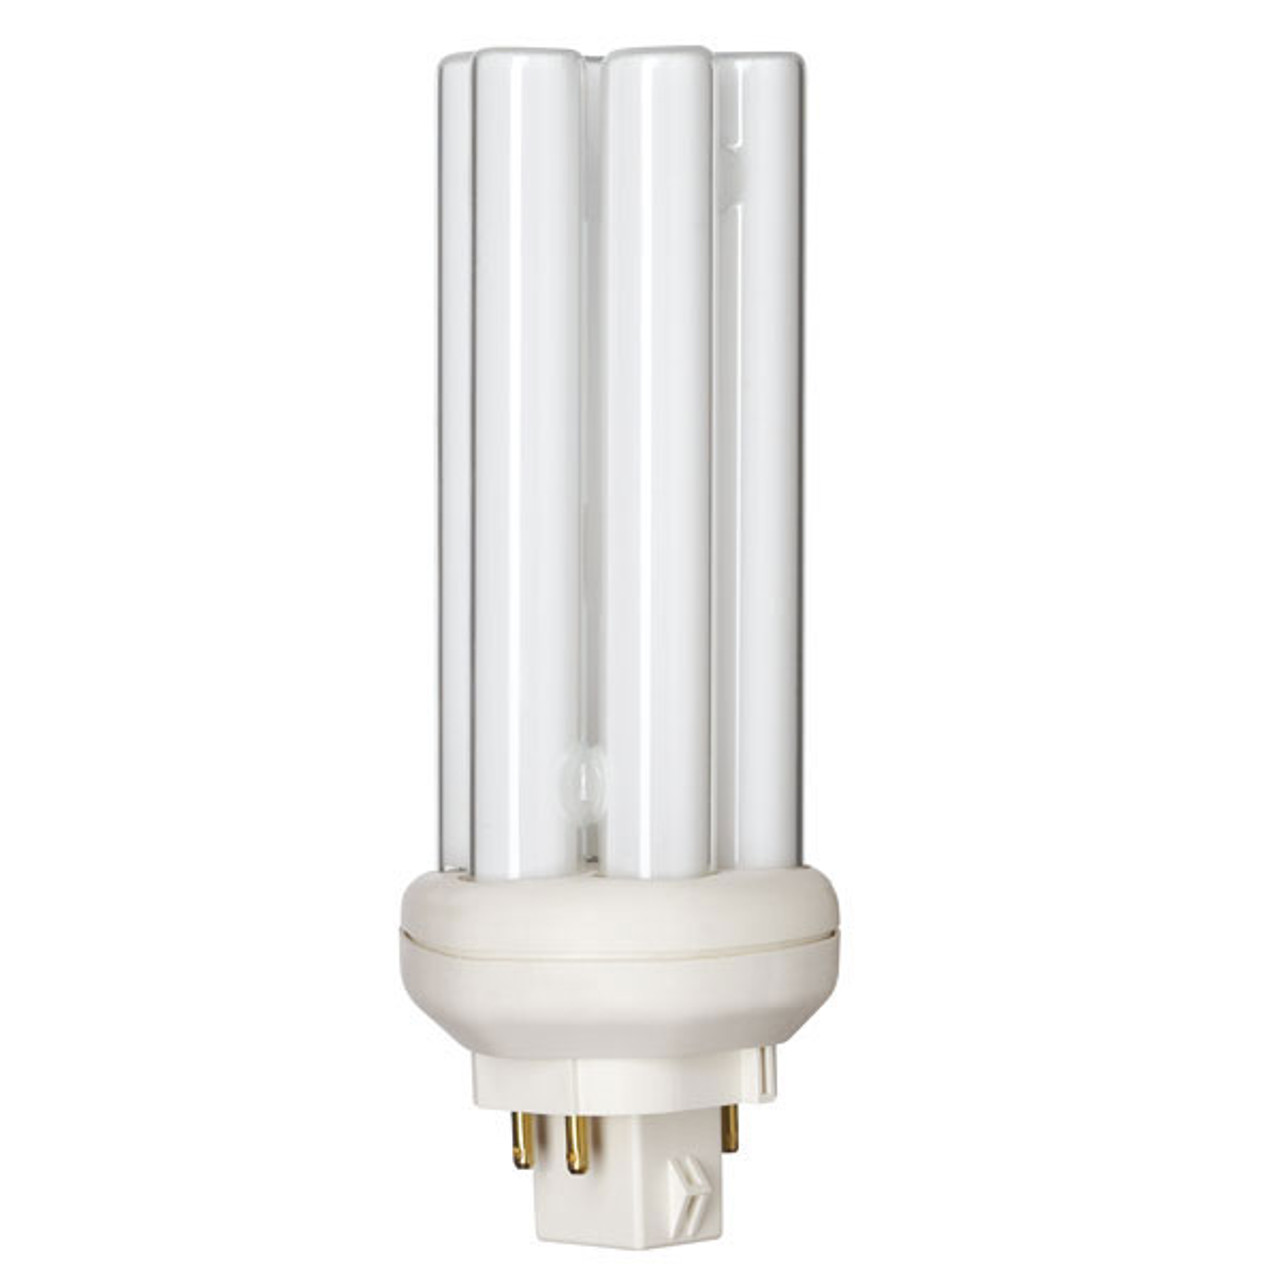 Philips PL-T 26W 4-Pin 840 Cool White